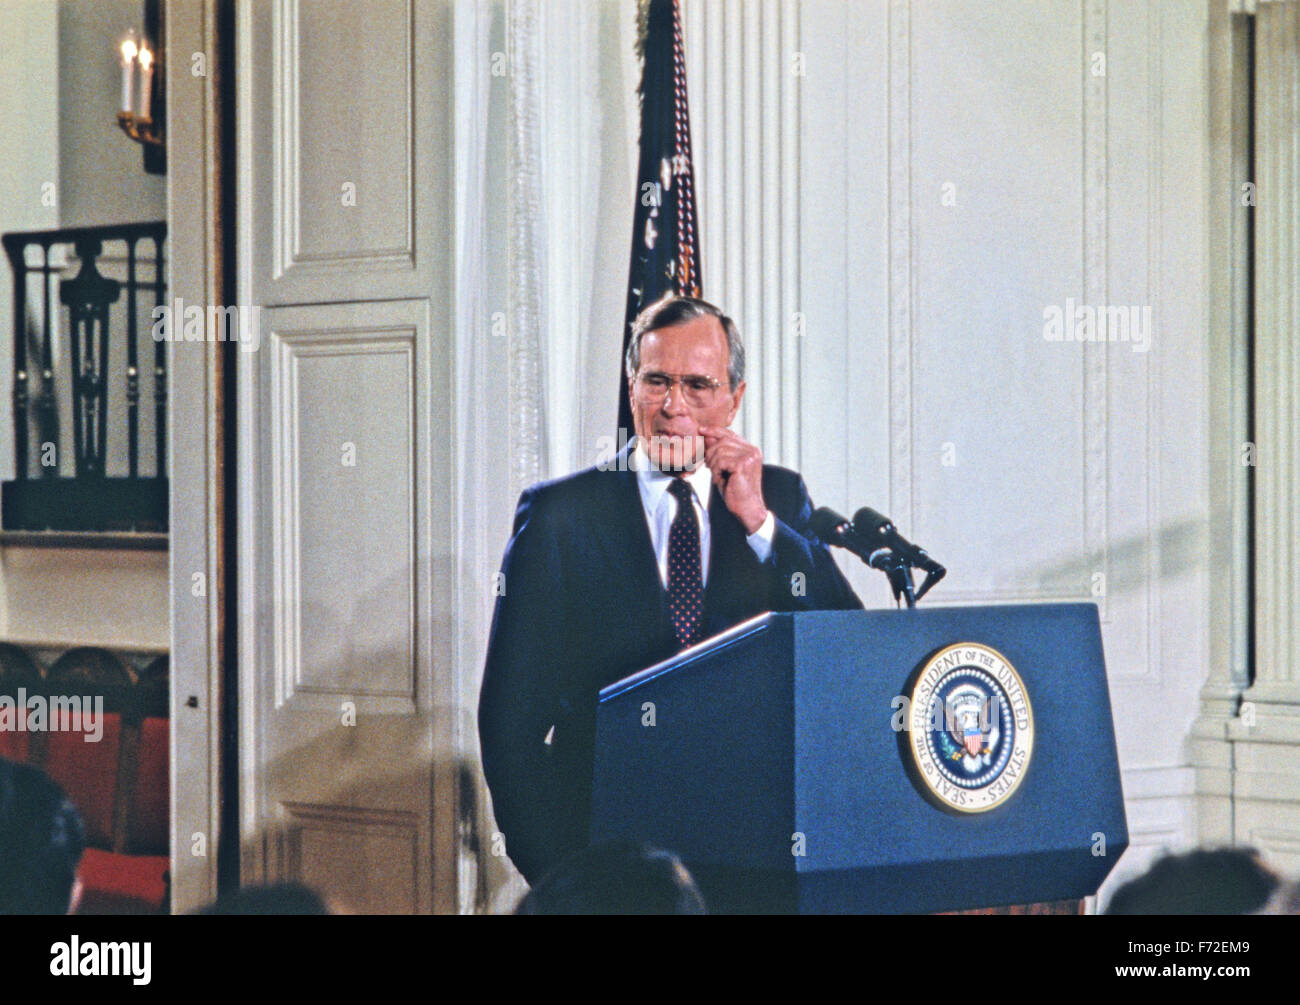 United States President George H.W. Bush holds a press conference in the East Room of the White House in Washington, DC on June 4, 1992. In his opening remarks the President discussed the budget deficit and advocated for a balanced budget amendment to the US Constitution. Credit: Ron Sachs/CNP - NO WIRE SERVICE - Stock Photo